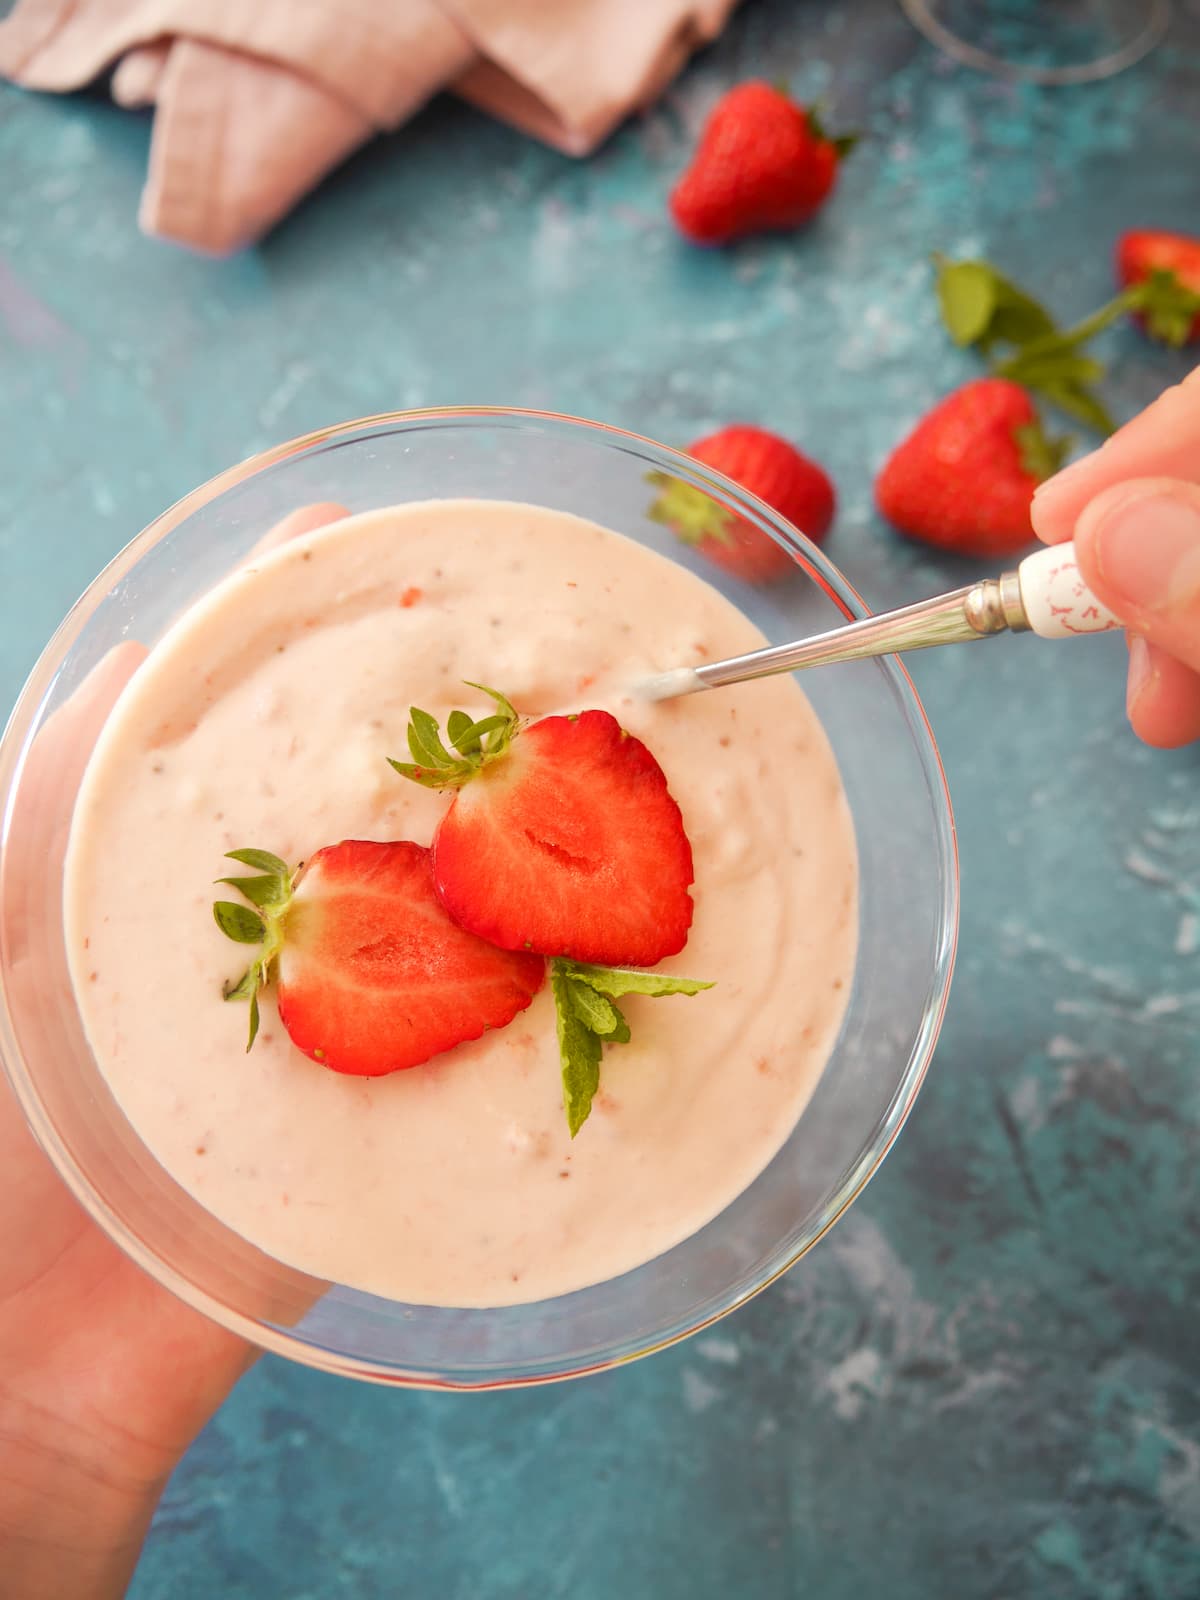 A hand holding a glass serving dishes filled with strawberry mousse topped with sliced strawberries and mint leaves, with whole strawberries set alongside.